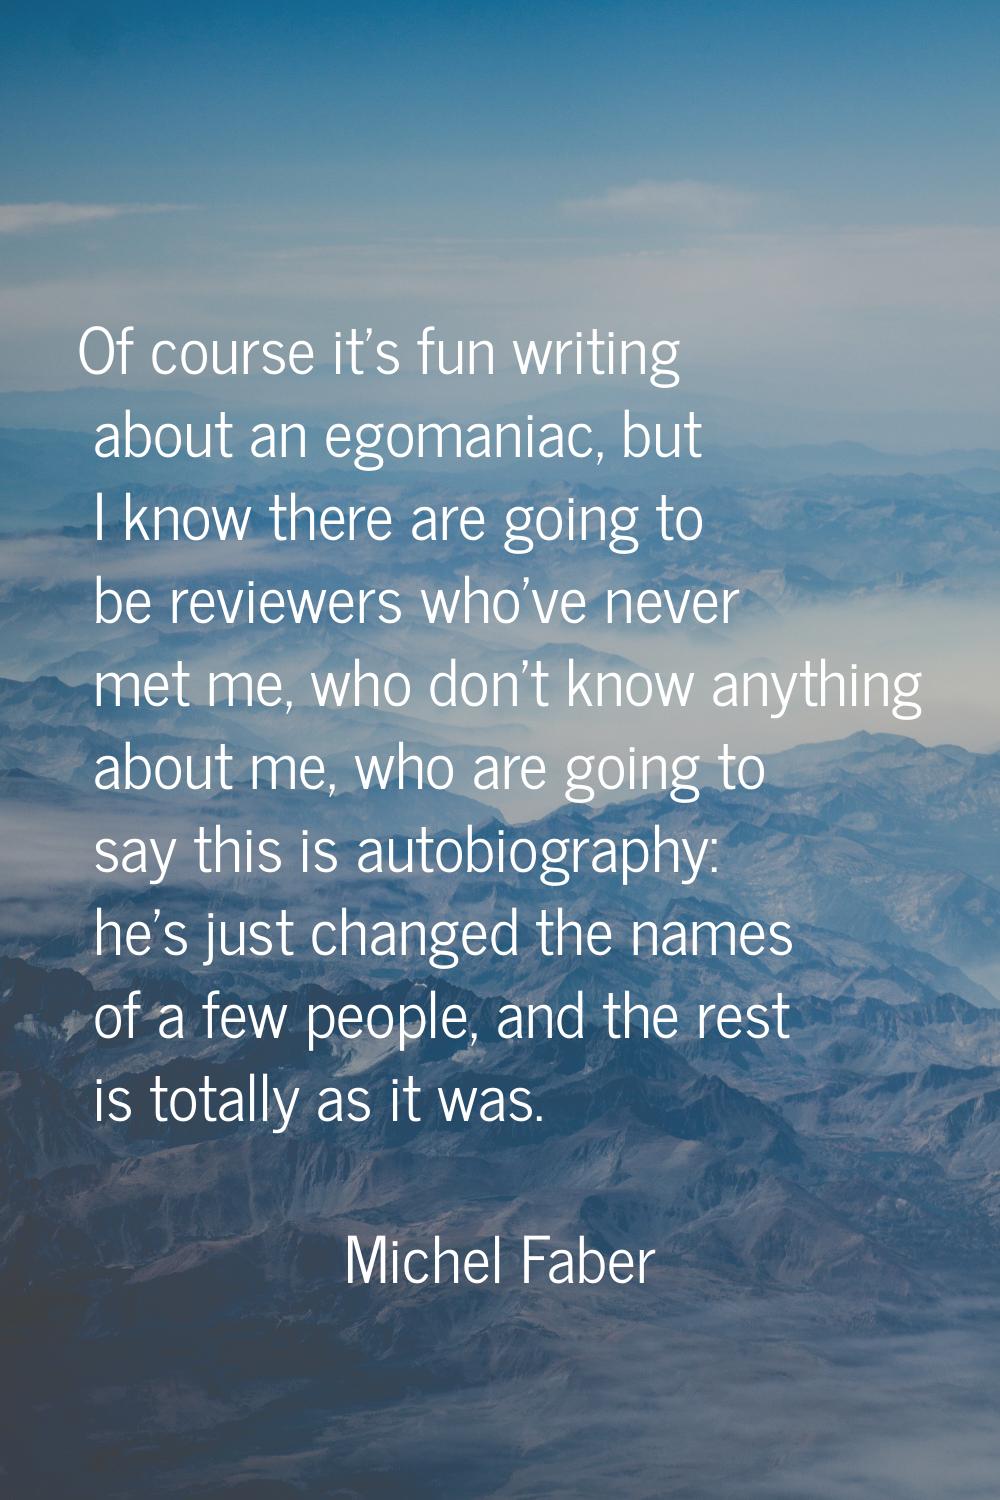 Of course it's fun writing about an egomaniac, but I know there are going to be reviewers who've ne